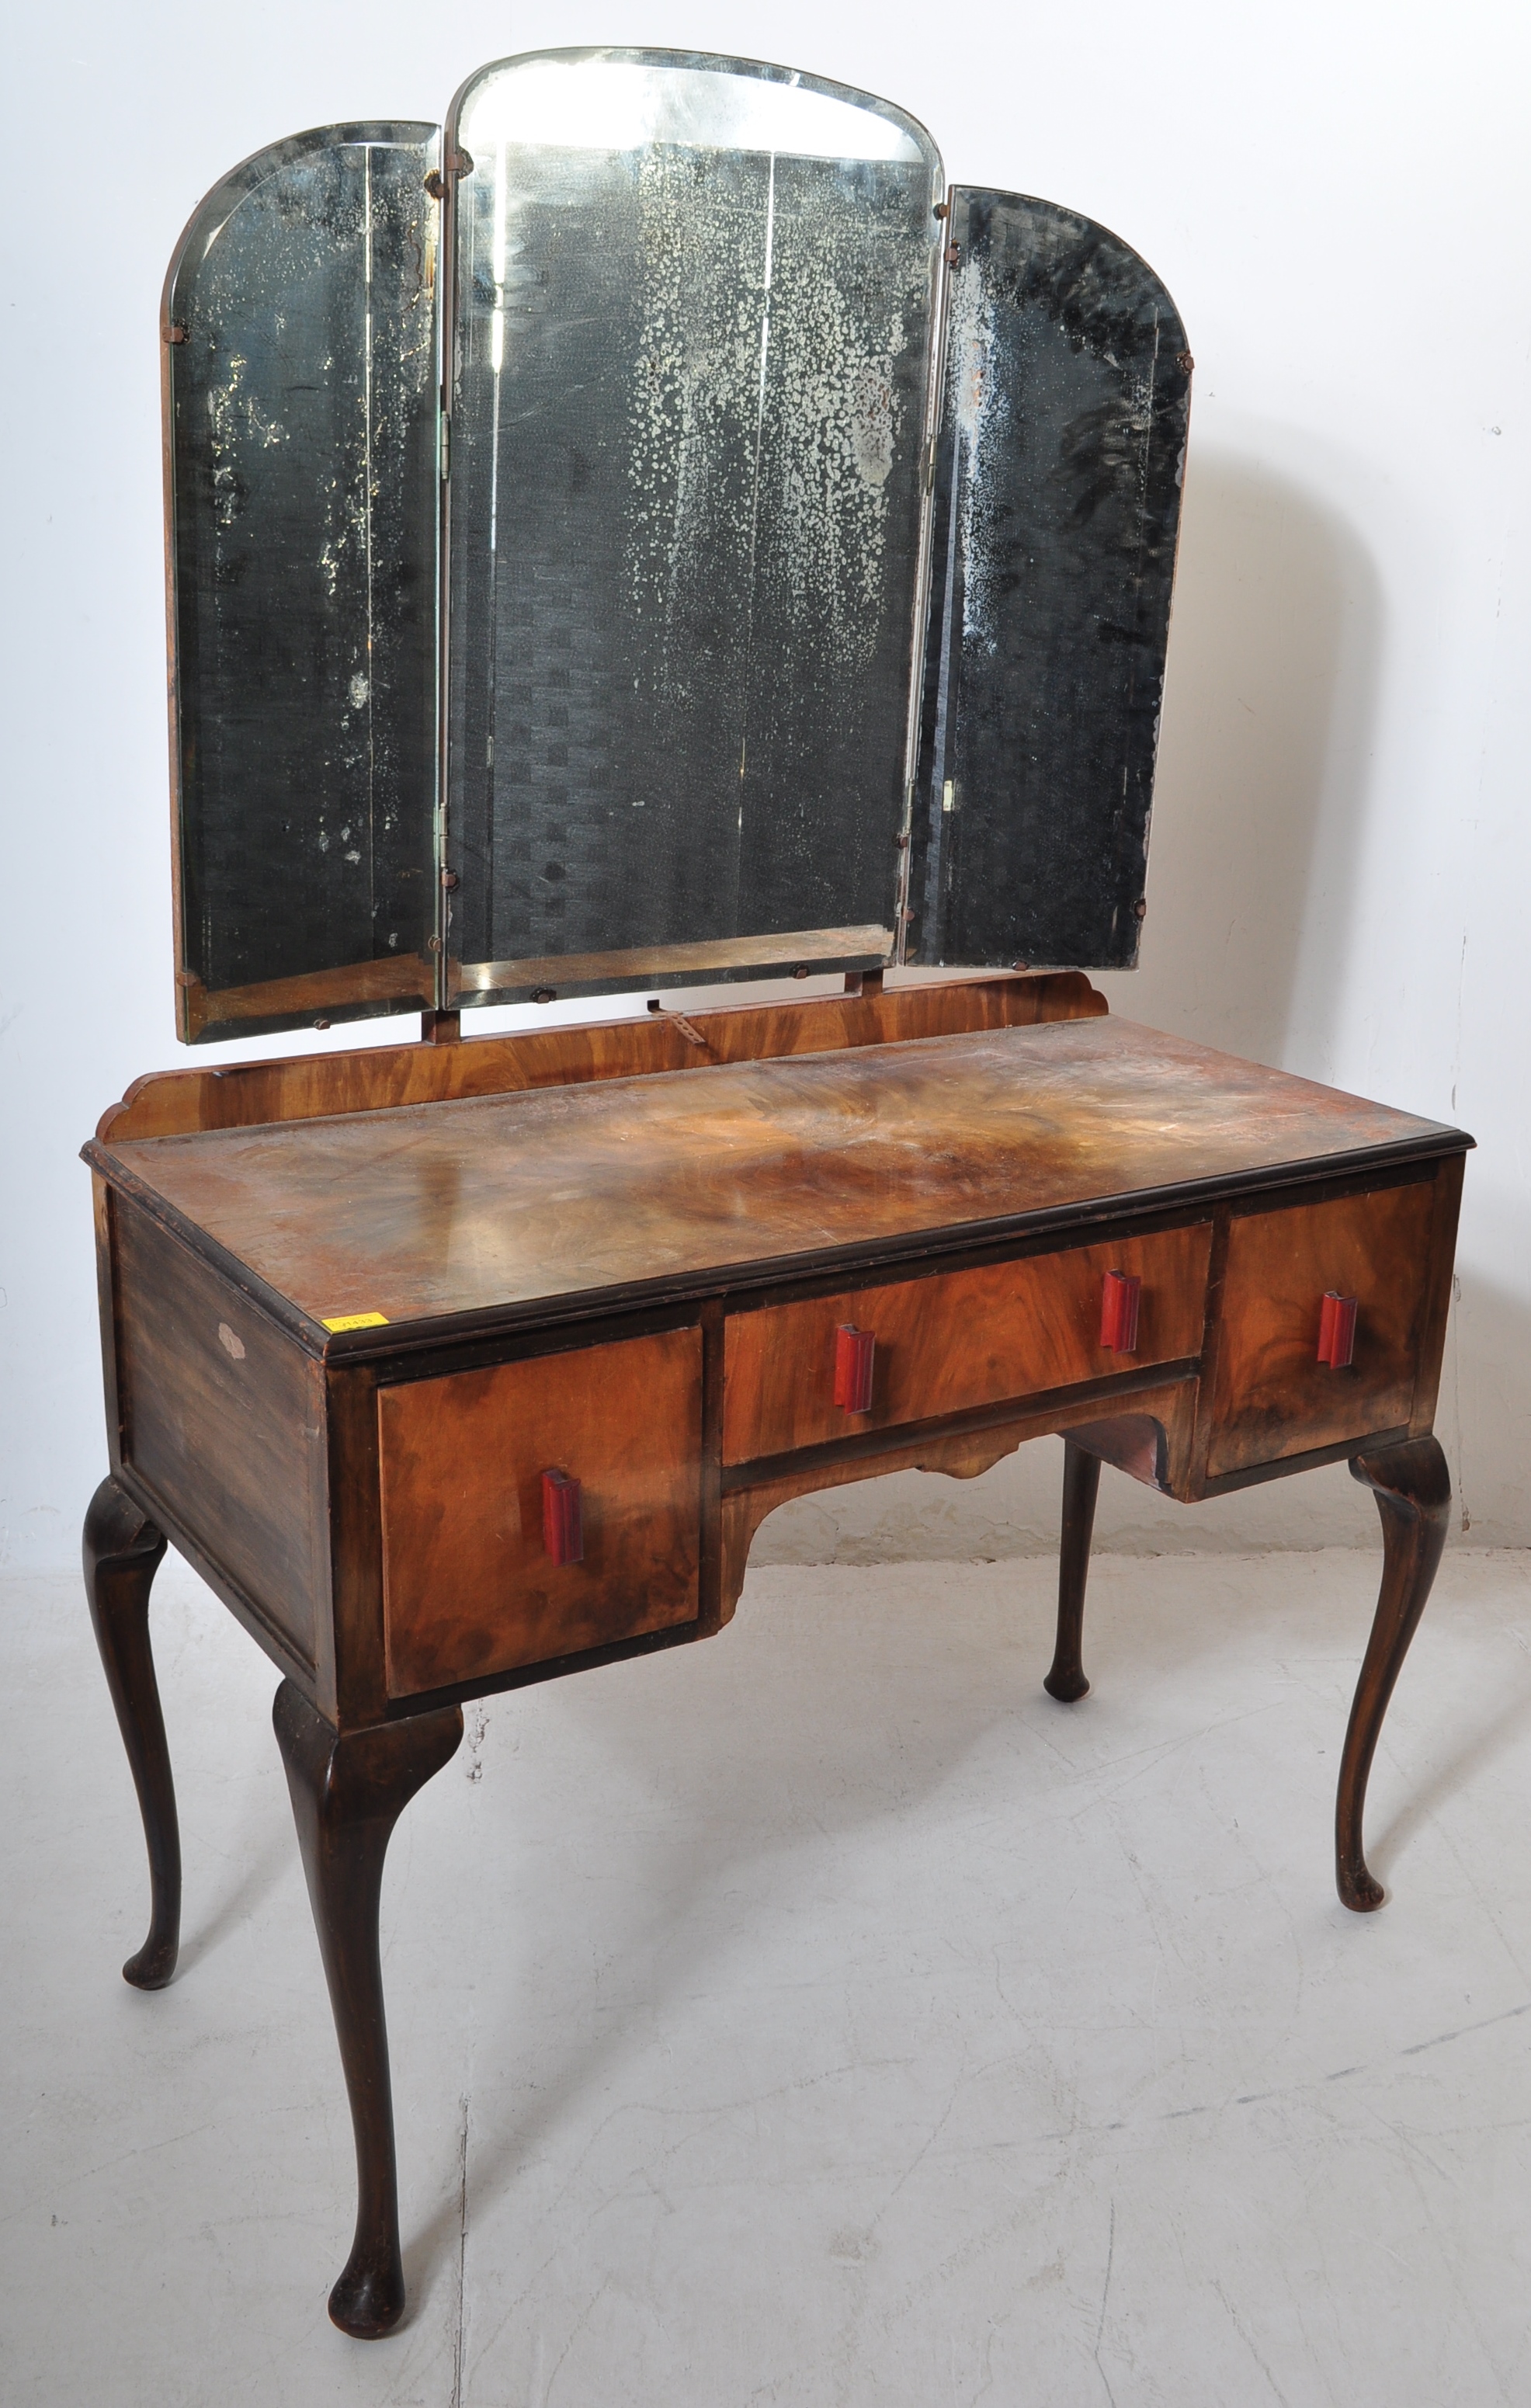 1940S WALNUT QUEEN ANNE REVIVAL LADIES DRESSING TABLE - Image 2 of 8